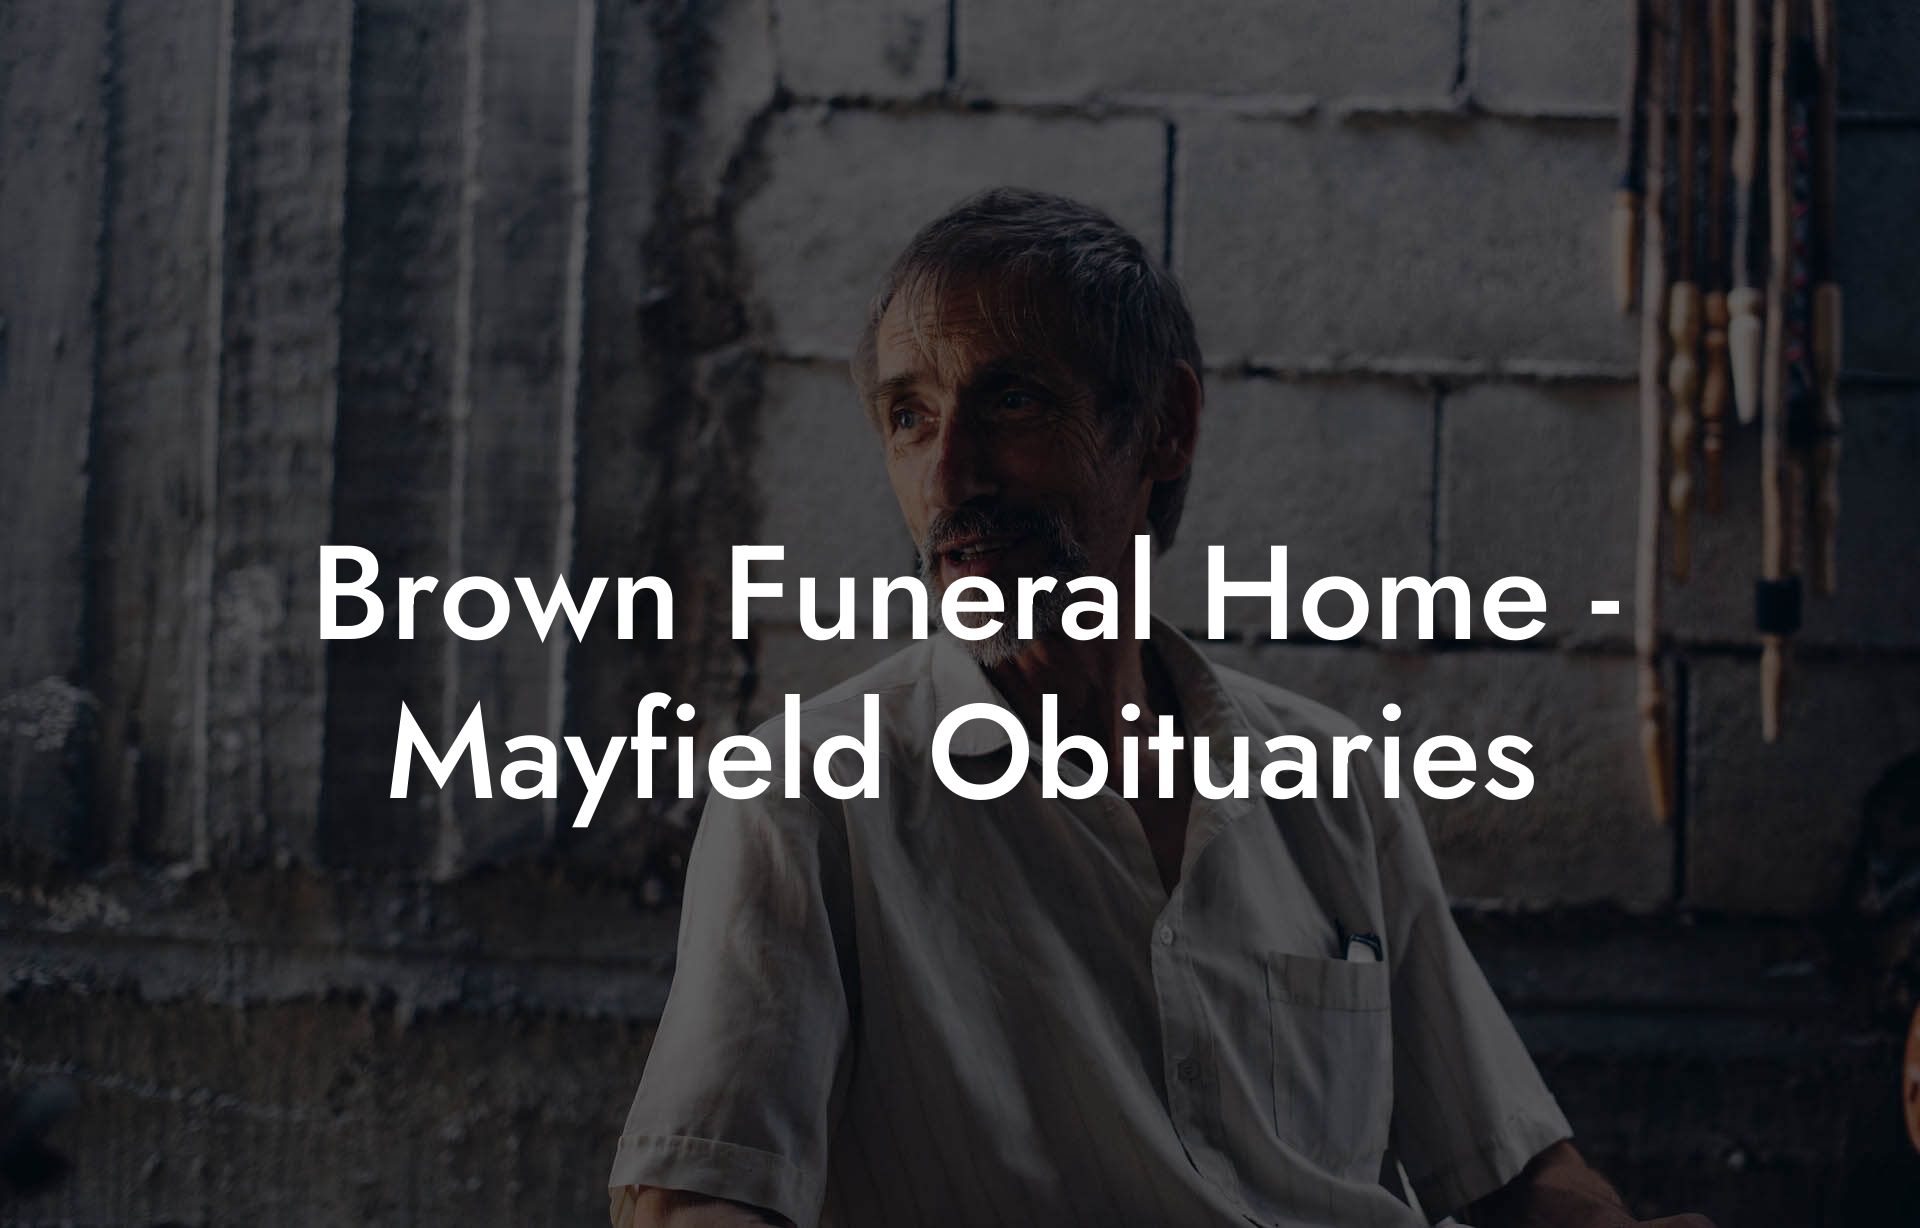 Brown Funeral Home - Mayfield Obituaries